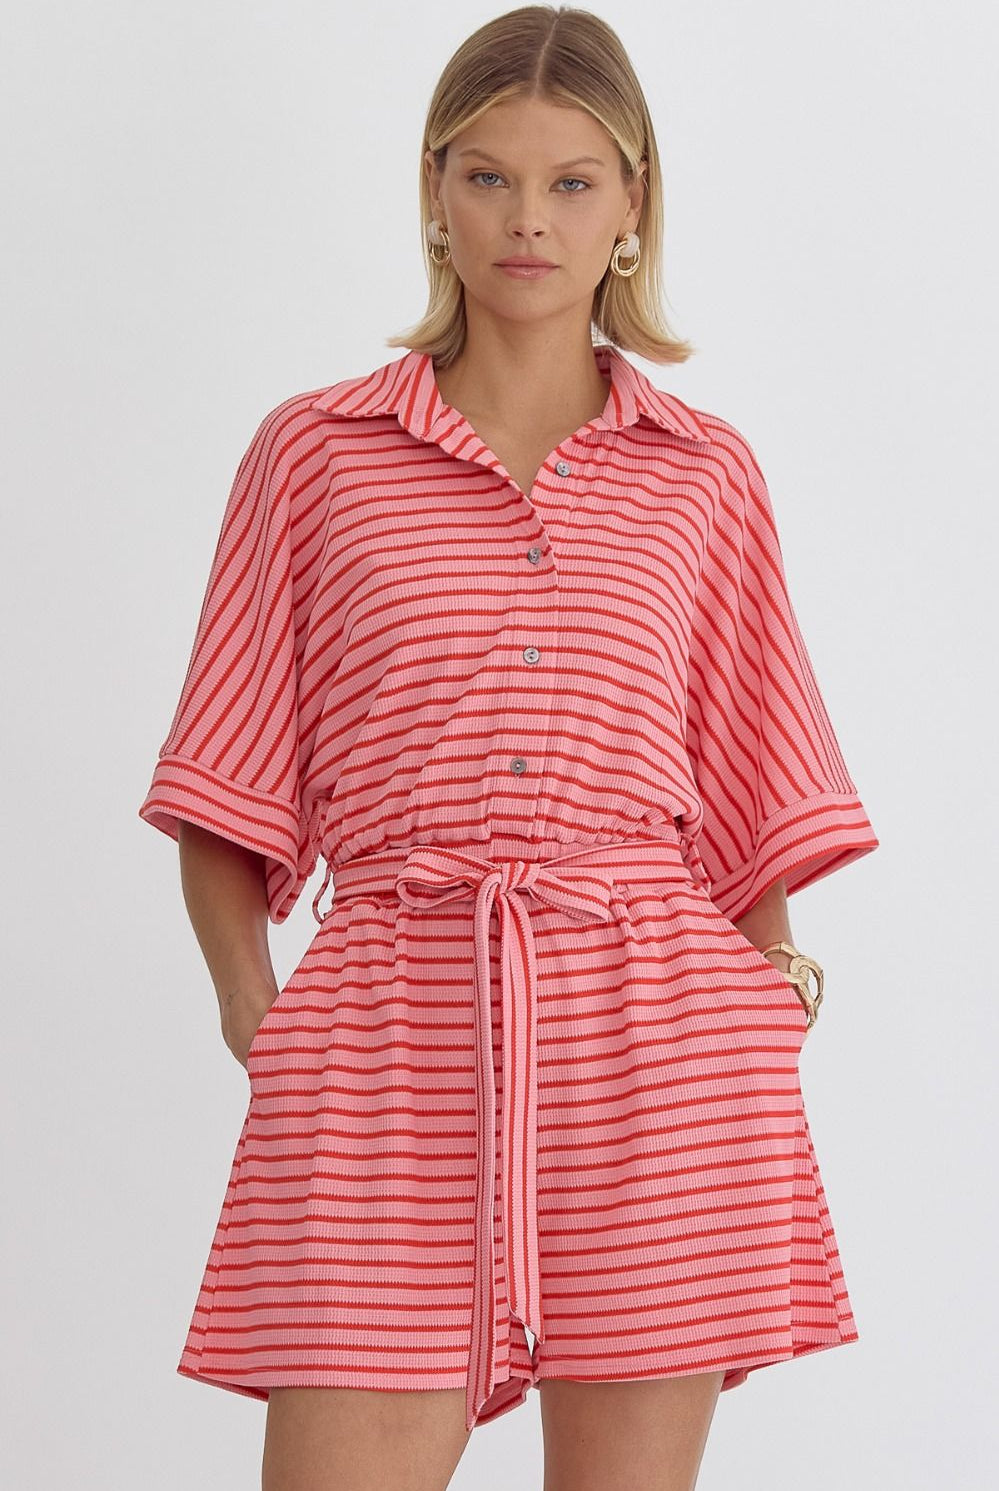 Adalin Textured Stripe Button Down Collared Romper - Be You Boutique